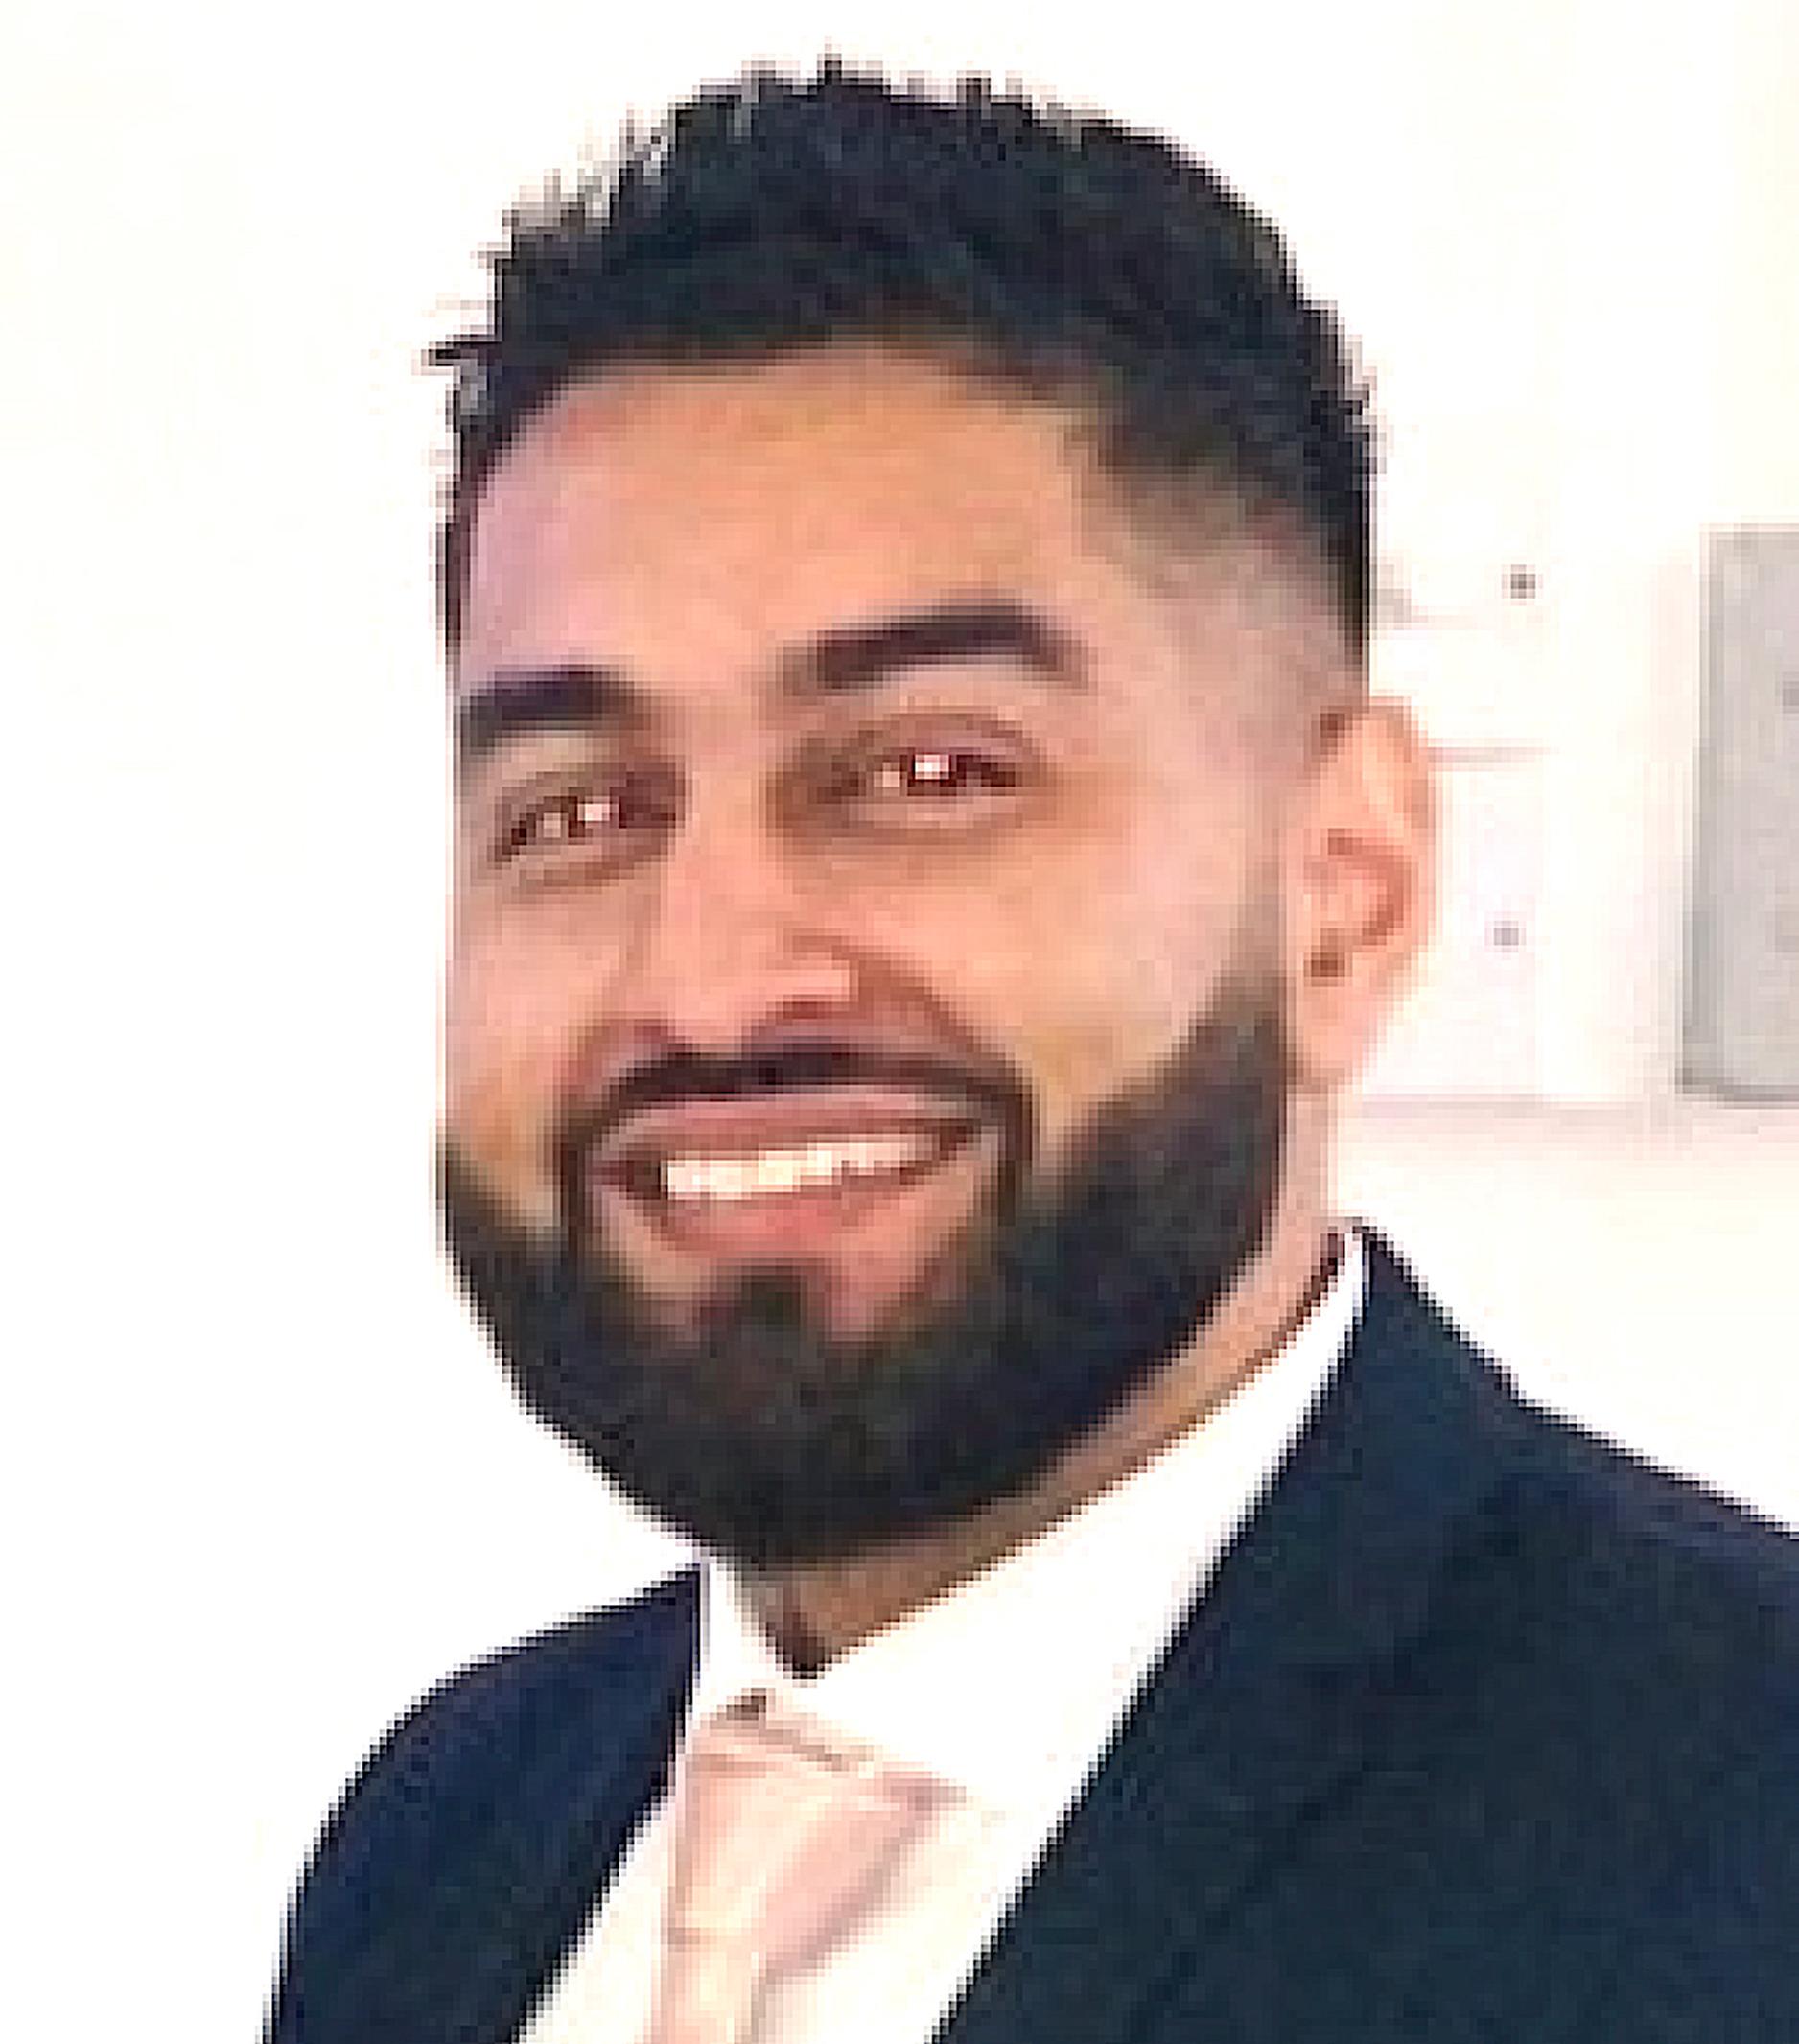 Nadeem is Technical Lead at Hertfordshire